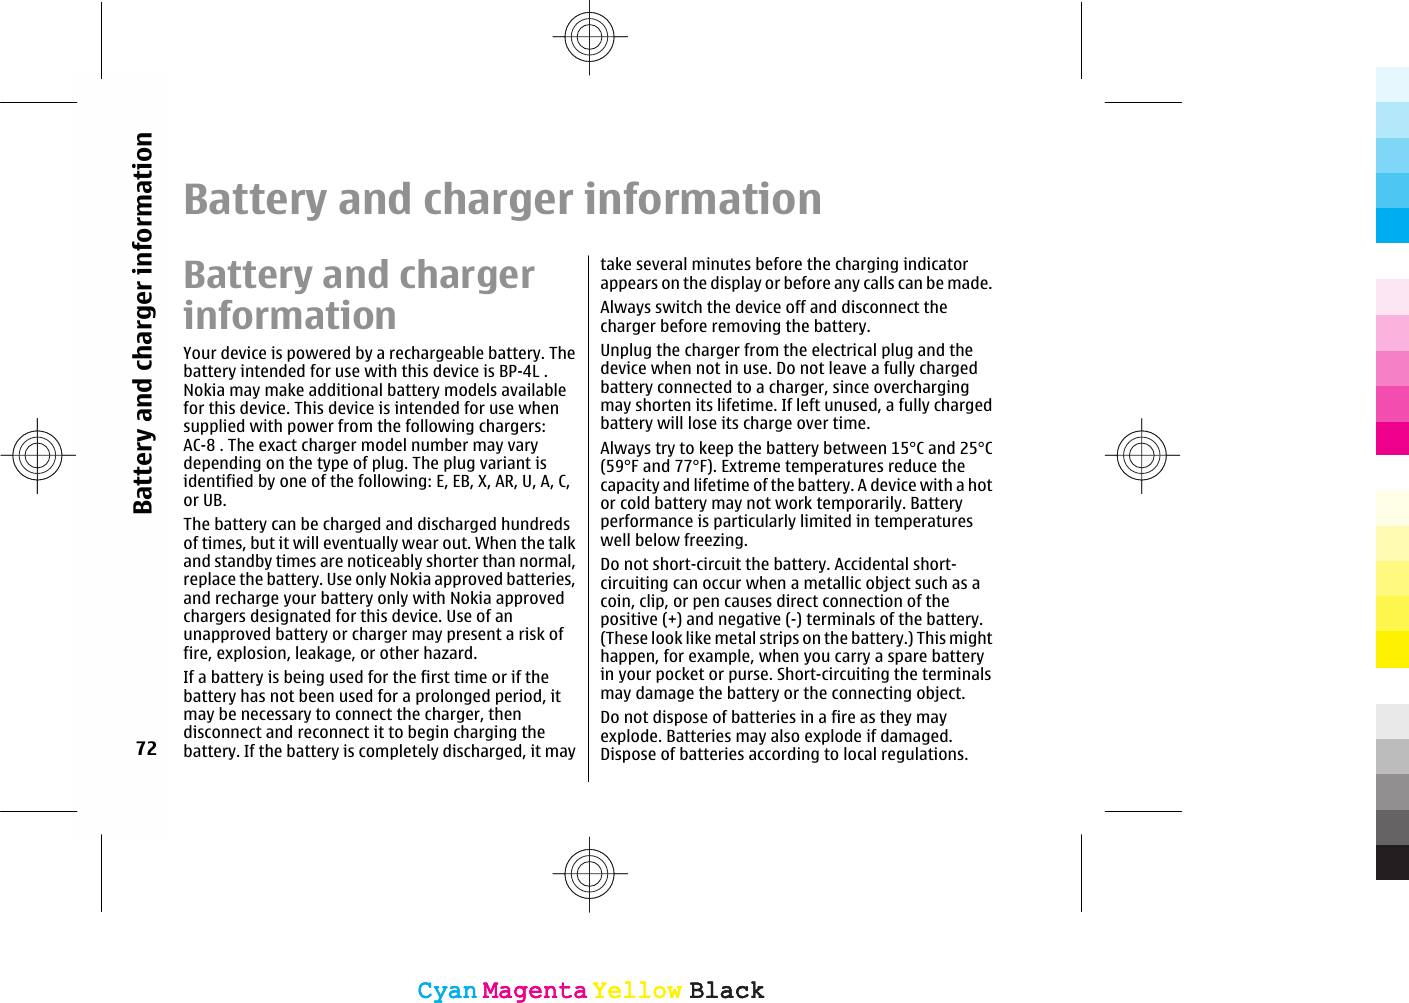 Battery and charger informationBattery and chargerinformationYour device is powered by a rechargeable battery. Thebattery intended for use with this device is BP-4L .Nokia may make additional battery models availablefor this device. This device is intended for use whensupplied with power from the following chargers:AC-8 . The exact charger model number may varydepending on the type of plug. The plug variant isidentified by one of the following: E, EB, X, AR, U, A, C,or UB.The battery can be charged and discharged hundredsof times, but it will eventually wear out. When the talkand standby times are noticeably shorter than normal,replace the battery. Use only Nokia approved batteries,and recharge your battery only with Nokia approvedchargers designated for this device. Use of anunapproved battery or charger may present a risk offire, explosion, leakage, or other hazard.If a battery is being used for the first time or if thebattery has not been used for a prolonged period, itmay be necessary to connect the charger, thendisconnect and reconnect it to begin charging thebattery. If the battery is completely discharged, it maytake several minutes before the charging indicatorappears on the display or before any calls can be made.Always switch the device off and disconnect thecharger before removing the battery.Unplug the charger from the electrical plug and thedevice when not in use. Do not leave a fully chargedbattery connected to a charger, since overchargingmay shorten its lifetime. If left unused, a fully chargedbattery will lose its charge over time.Always try to keep the battery between 15°C and 25°C(59°F and 77°F). Extreme temperatures reduce thecapacity and lifetime of the battery. A device with a hotor cold battery may not work temporarily. Batteryperformance is particularly limited in temperatureswell below freezing.Do not short-circuit the battery. Accidental short-circuiting can occur when a metallic object such as acoin, clip, or pen causes direct connection of thepositive (+) and negative (-) terminals of the battery.(These look like metal strips on the battery.) This mighthappen, for example, when you carry a spare batteryin your pocket or purse. Short-circuiting the terminalsmay damage the battery or the connecting object.Do not dispose of batteries in a fire as they mayexplode. Batteries may also explode if damaged.Dispose of batteries according to local regulations.72Battery and charger informationCyanCyanMagentaMagentaYellowYellowBlackBlackCyanCyanMagentaMagentaYellowYellowBlackBlack